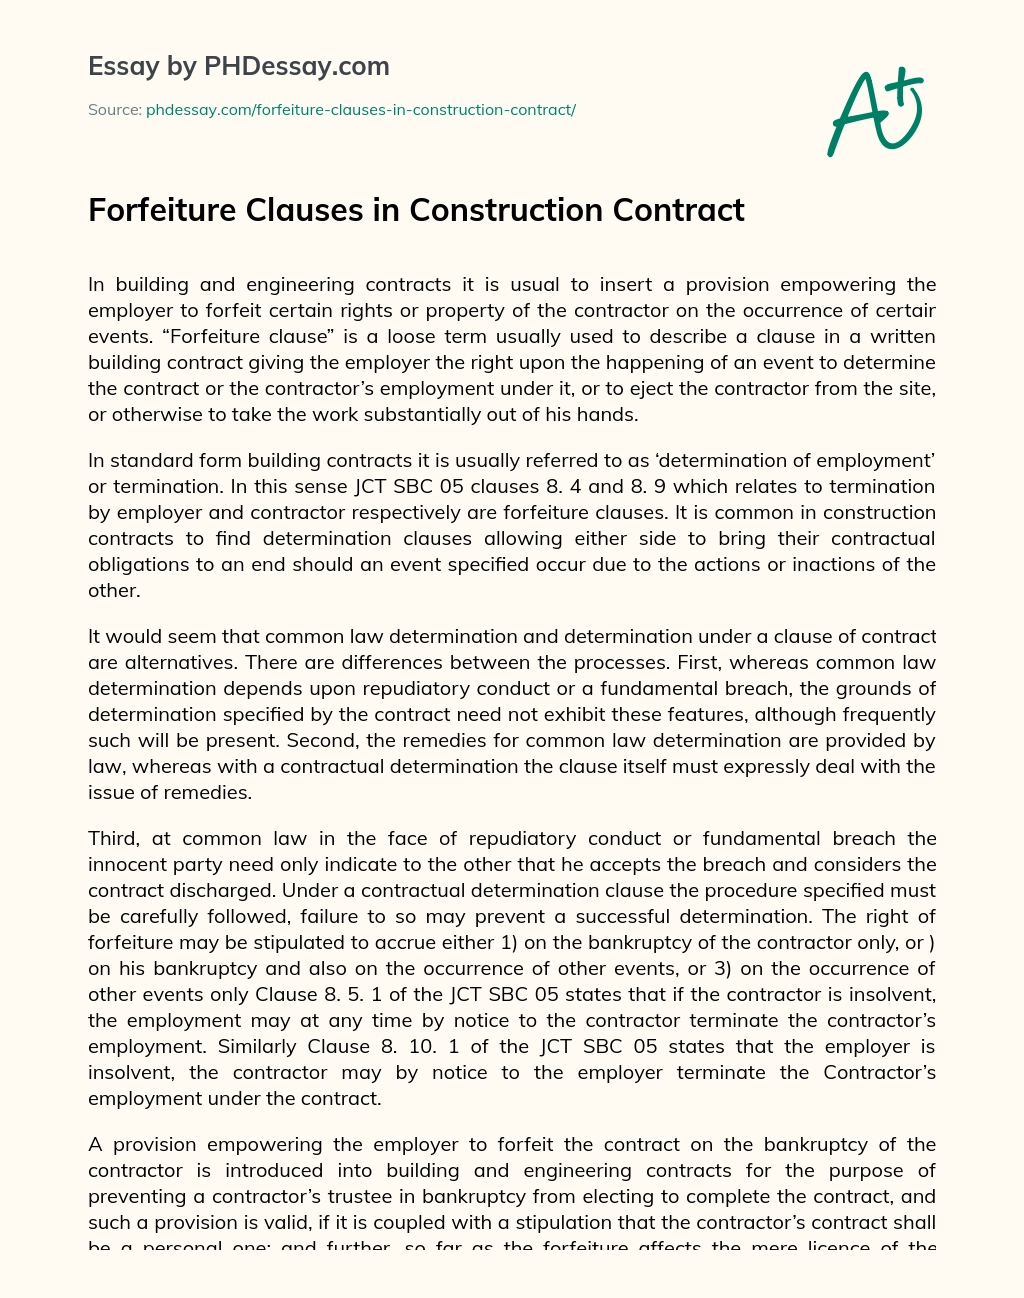 Forfeiture Clauses in Construction Contract essay